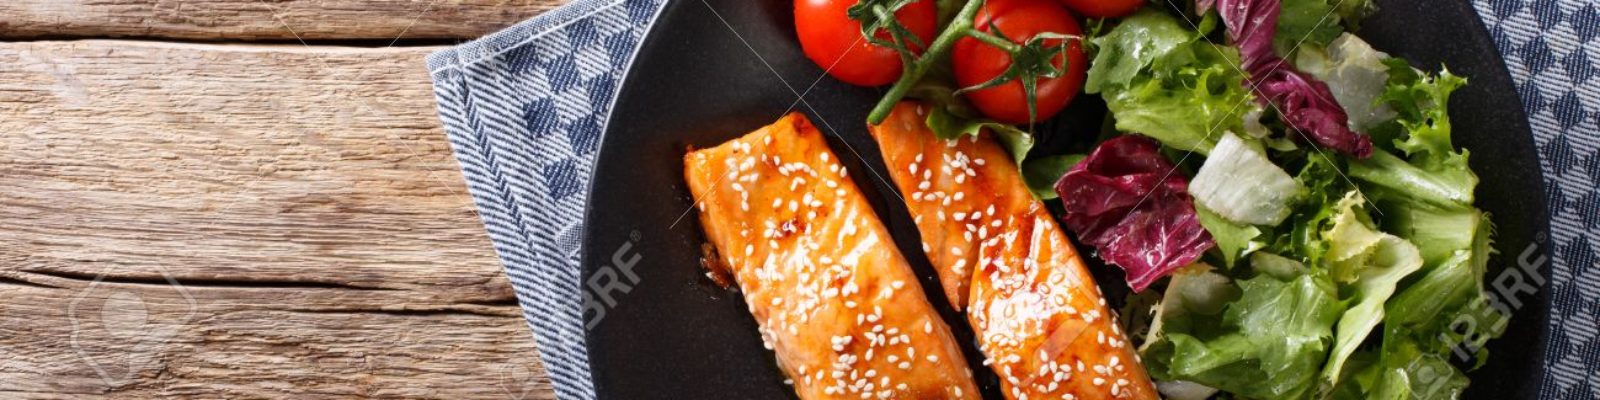 cropped-76503978-Salmon-with-sesame-seeds-in-Asian-style-and-fresh-salad-close-up-on-a-plate-horizontal-view-from-abo-Stock-Photo.jpg